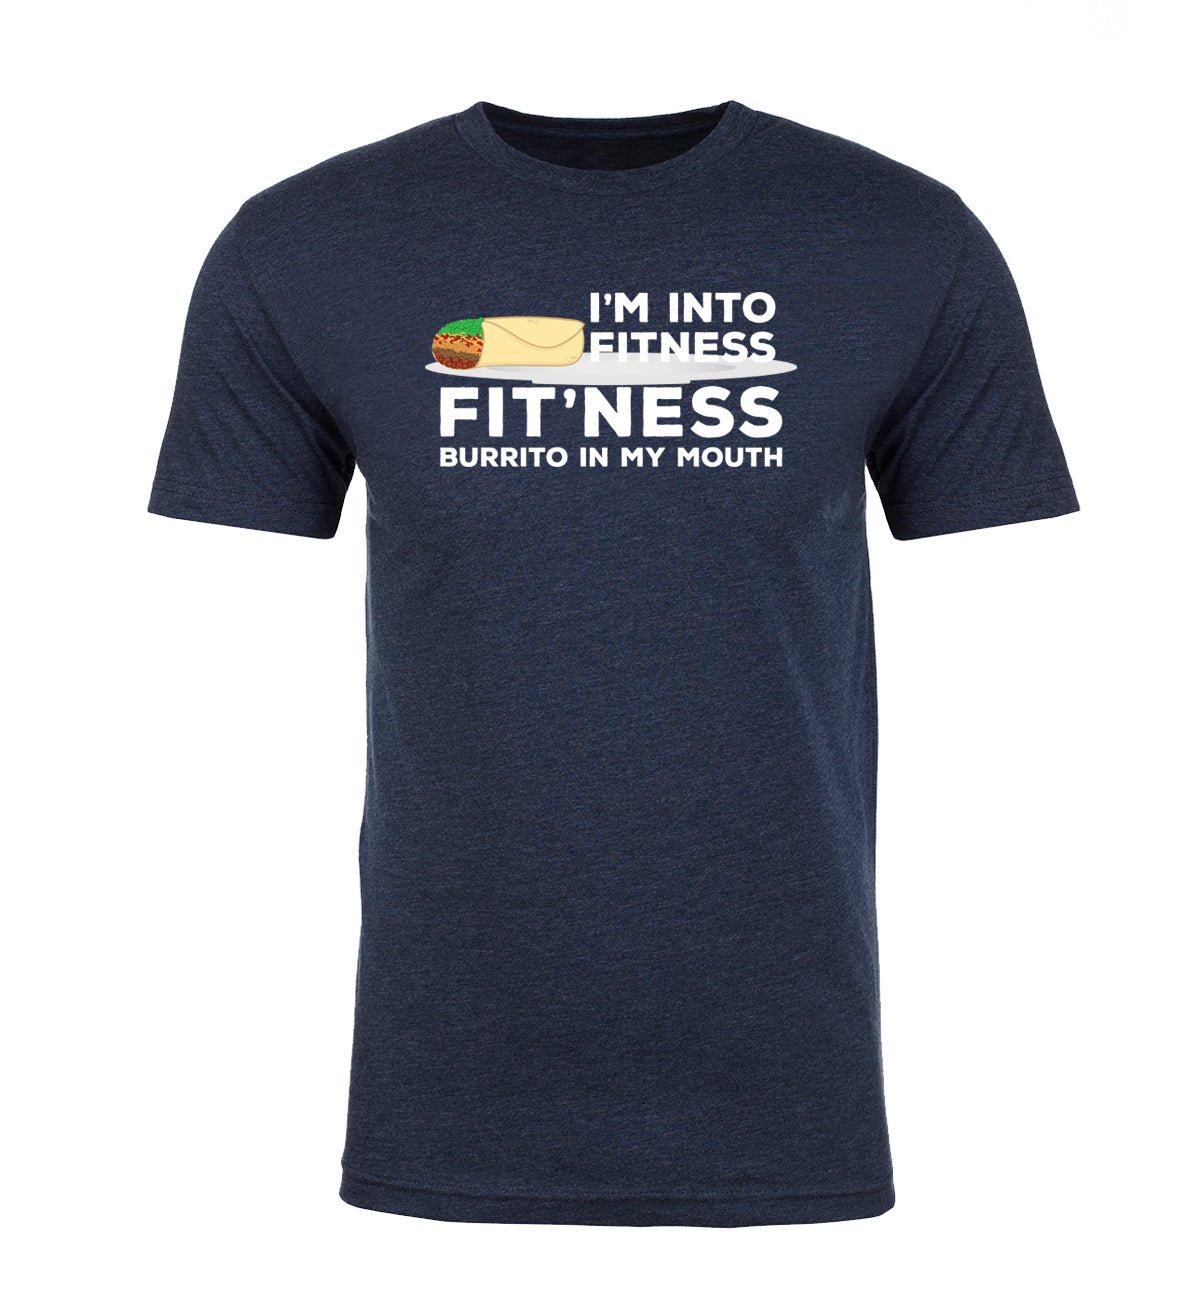 I'm Into Fitness - Fit'ness Burrito in My Mouth - Unisex T Shirts - Mato & Hash